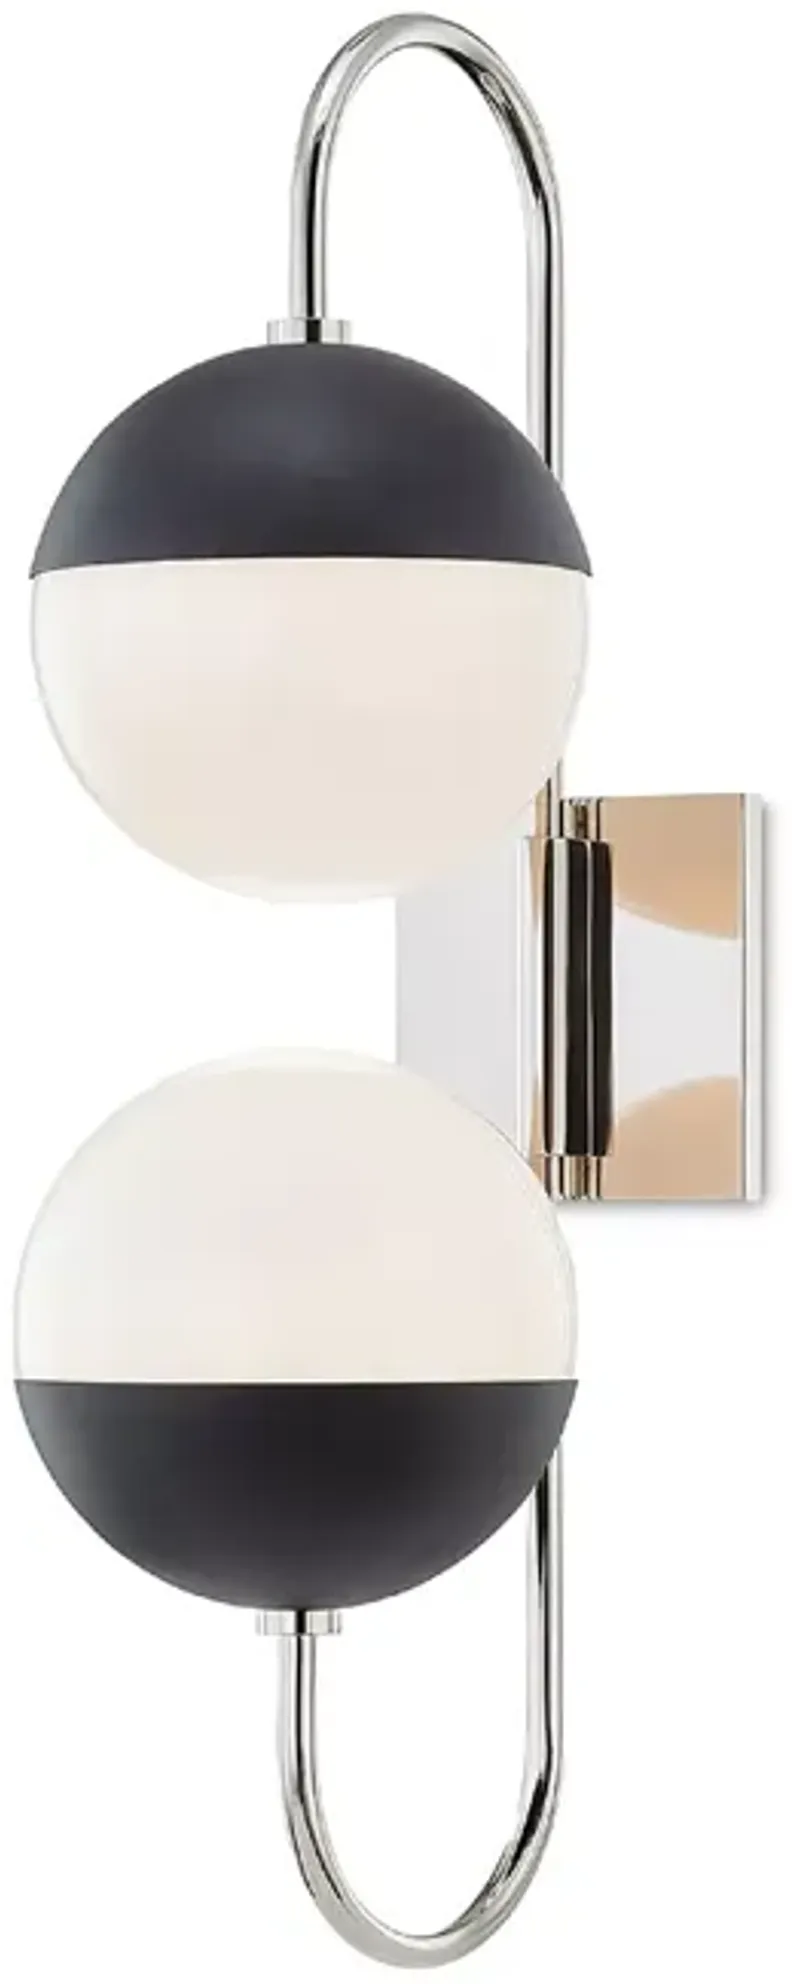 Mitzi Renee 2-Light Curved Wall Sconce 